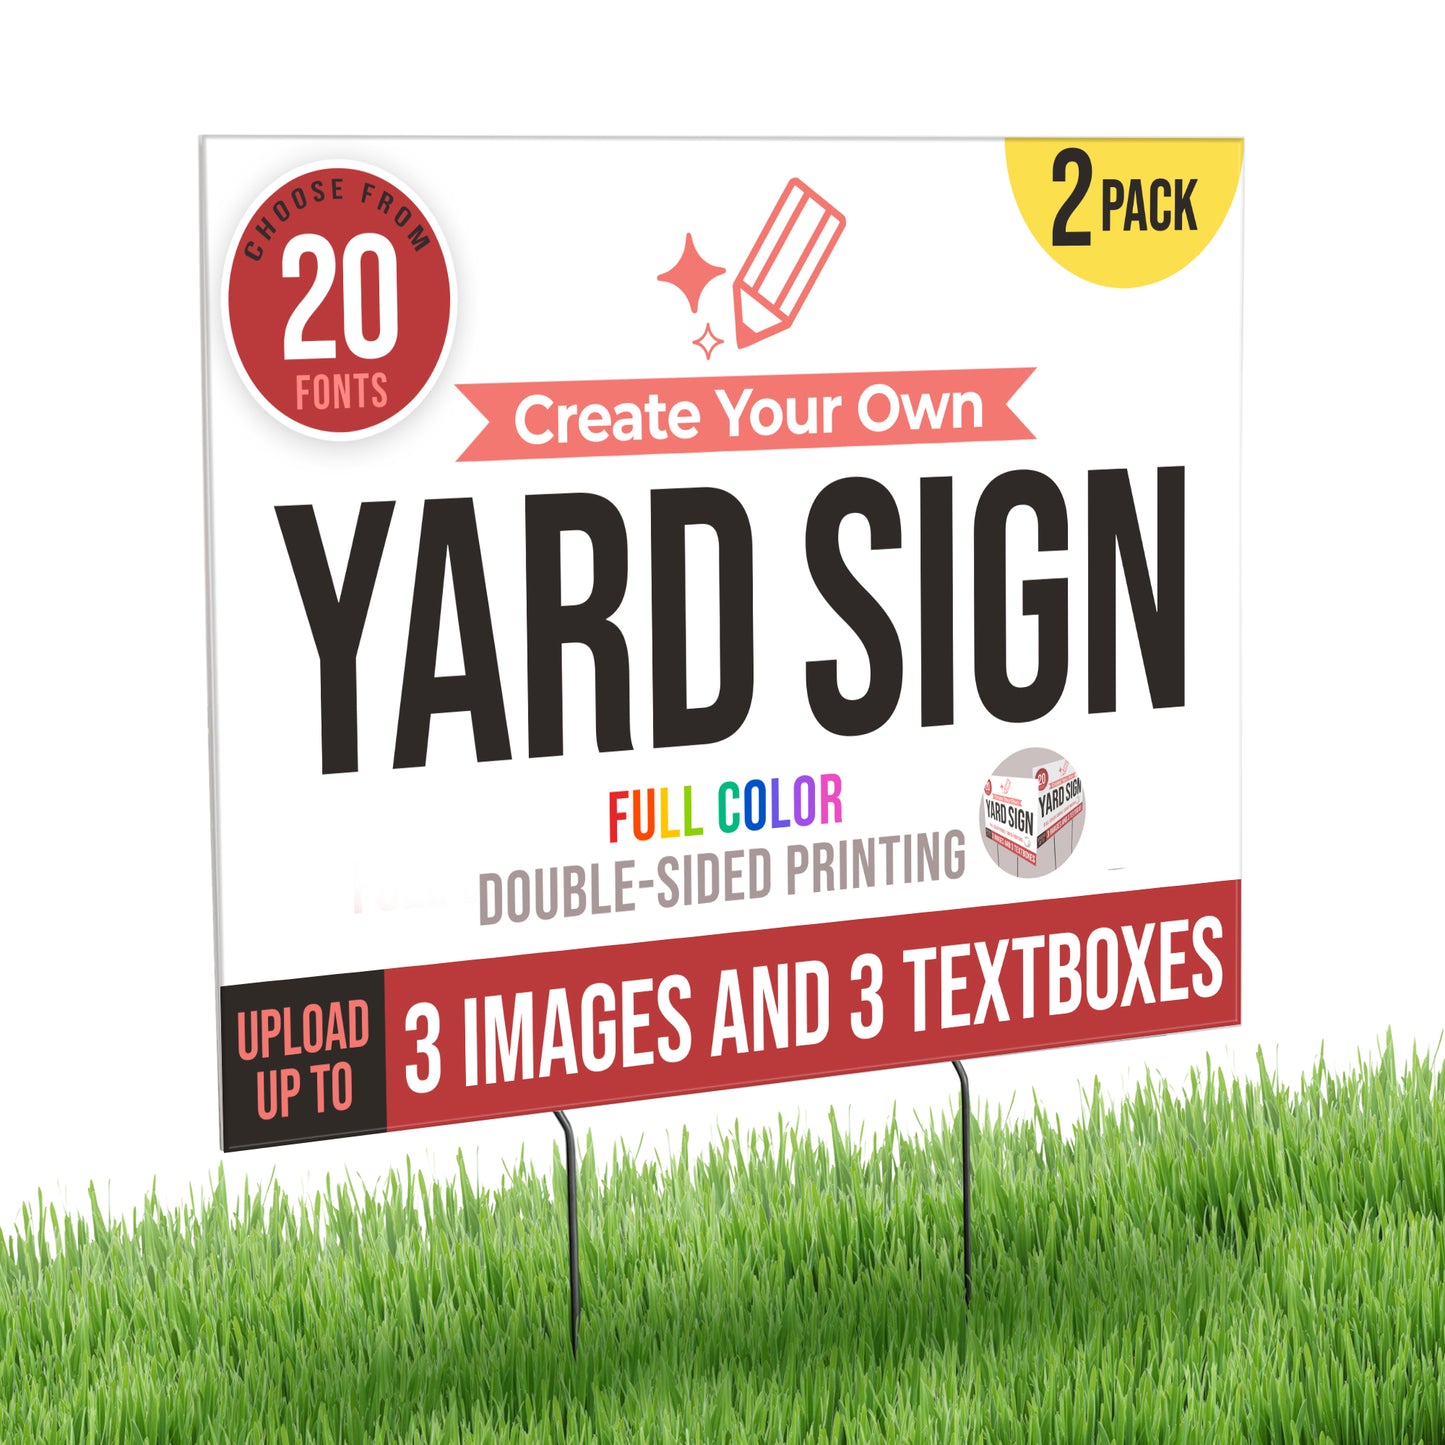 Personalized Corrugated Plastic Full Color Yard Signs for Outdoors, Home, Office, Business - 24"x18"